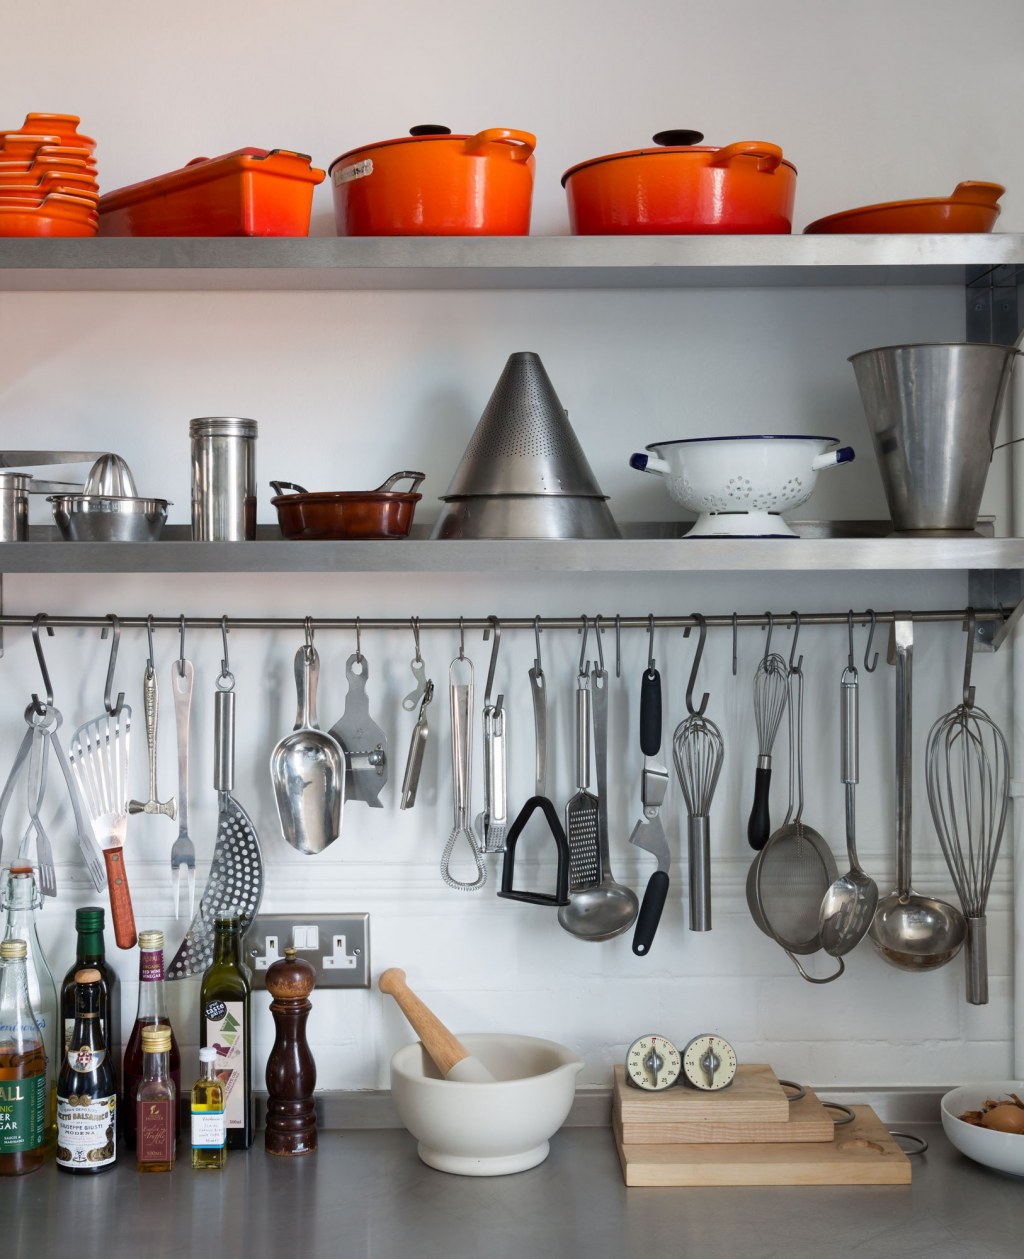 Old School House, East London / Shelving detail in kitchen with storage and cooking equipment